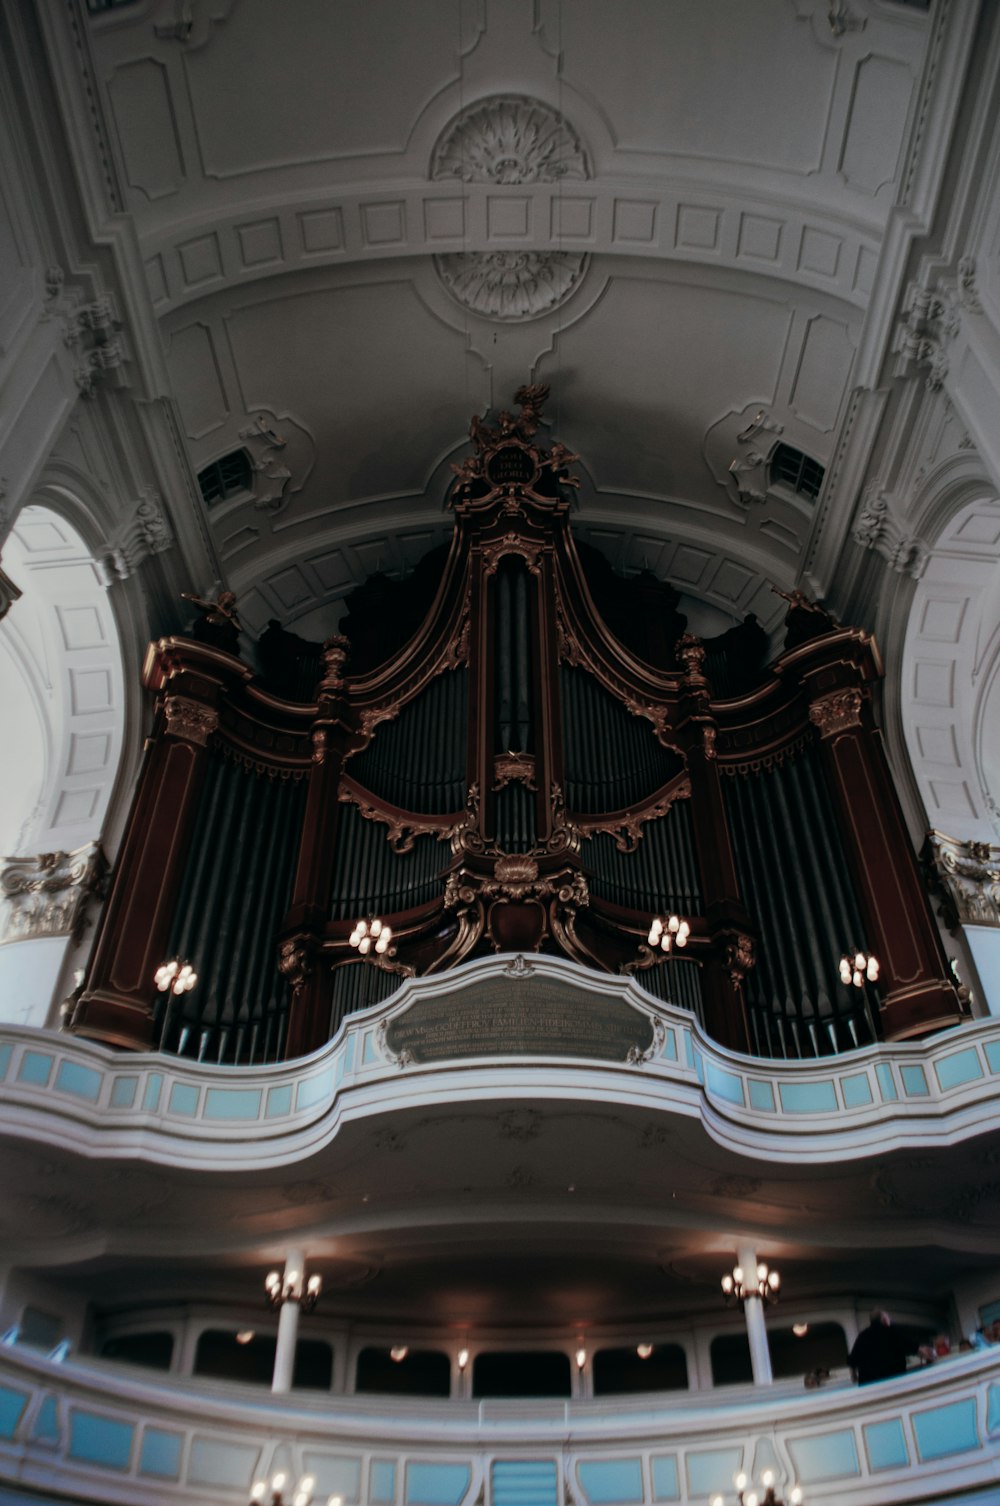 a large ornate ceiling with a large organ